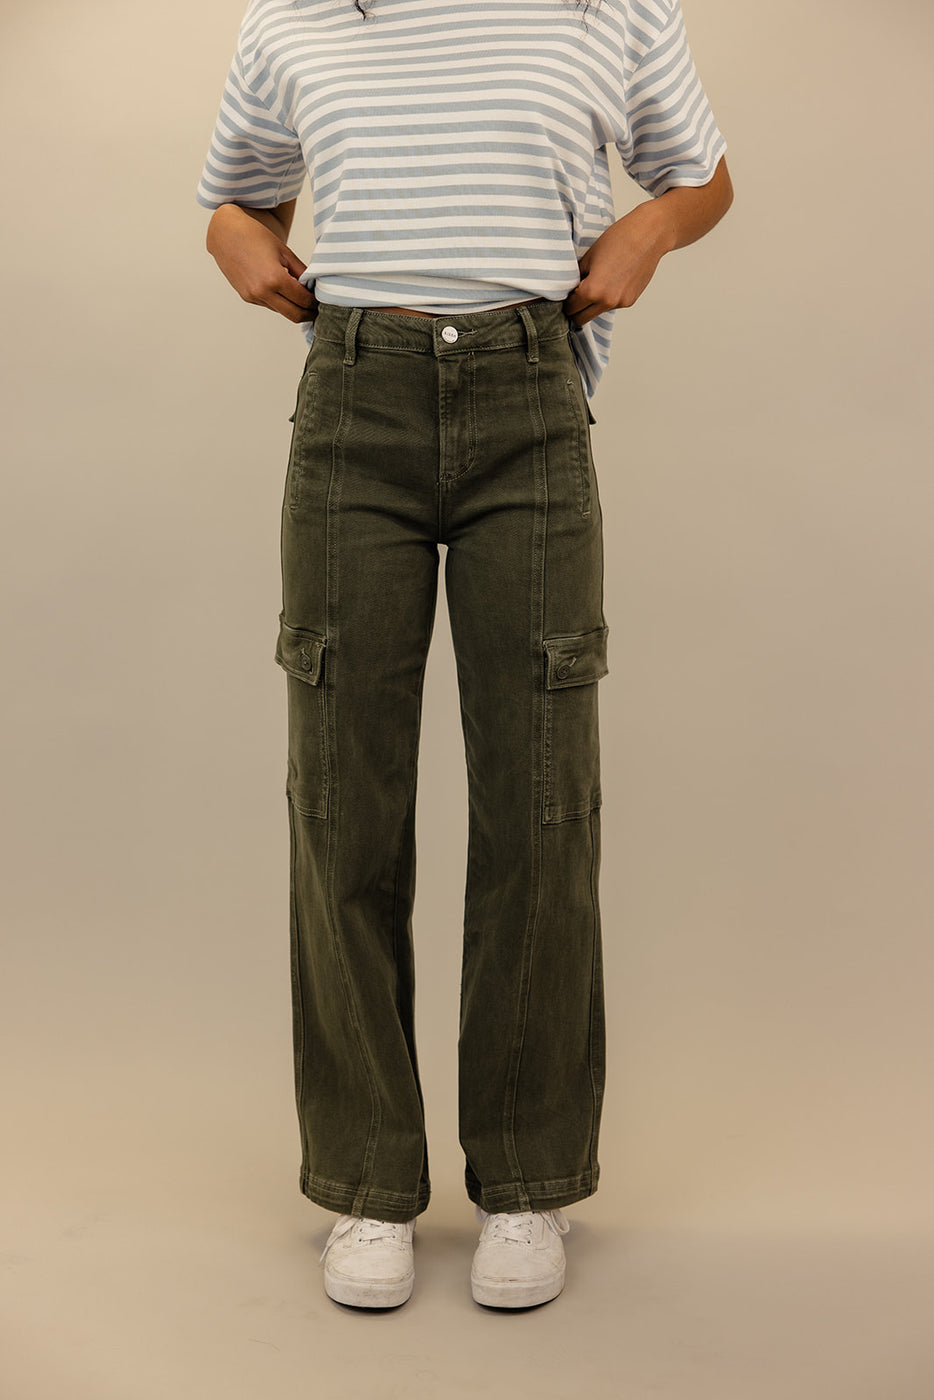 a person wearing a pair of pants